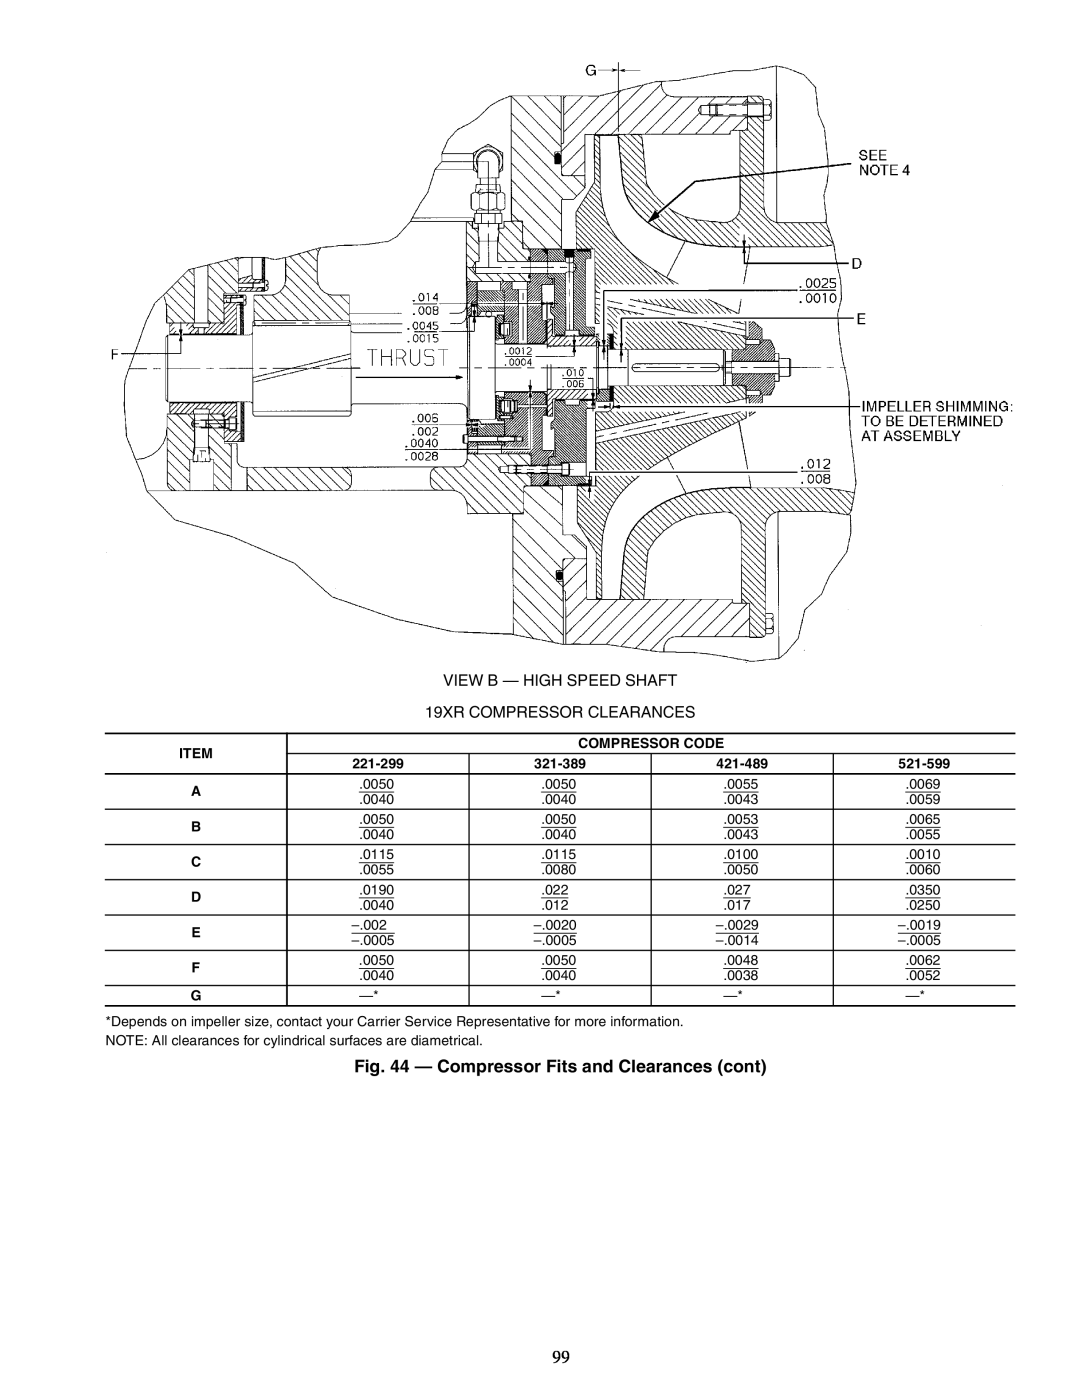 Carrier XRV specifications Compressor Fits and Clearances cont, VIEW B - HIGH SPEED SHAFT 19XR COMPRESSOR CLEARANCES 